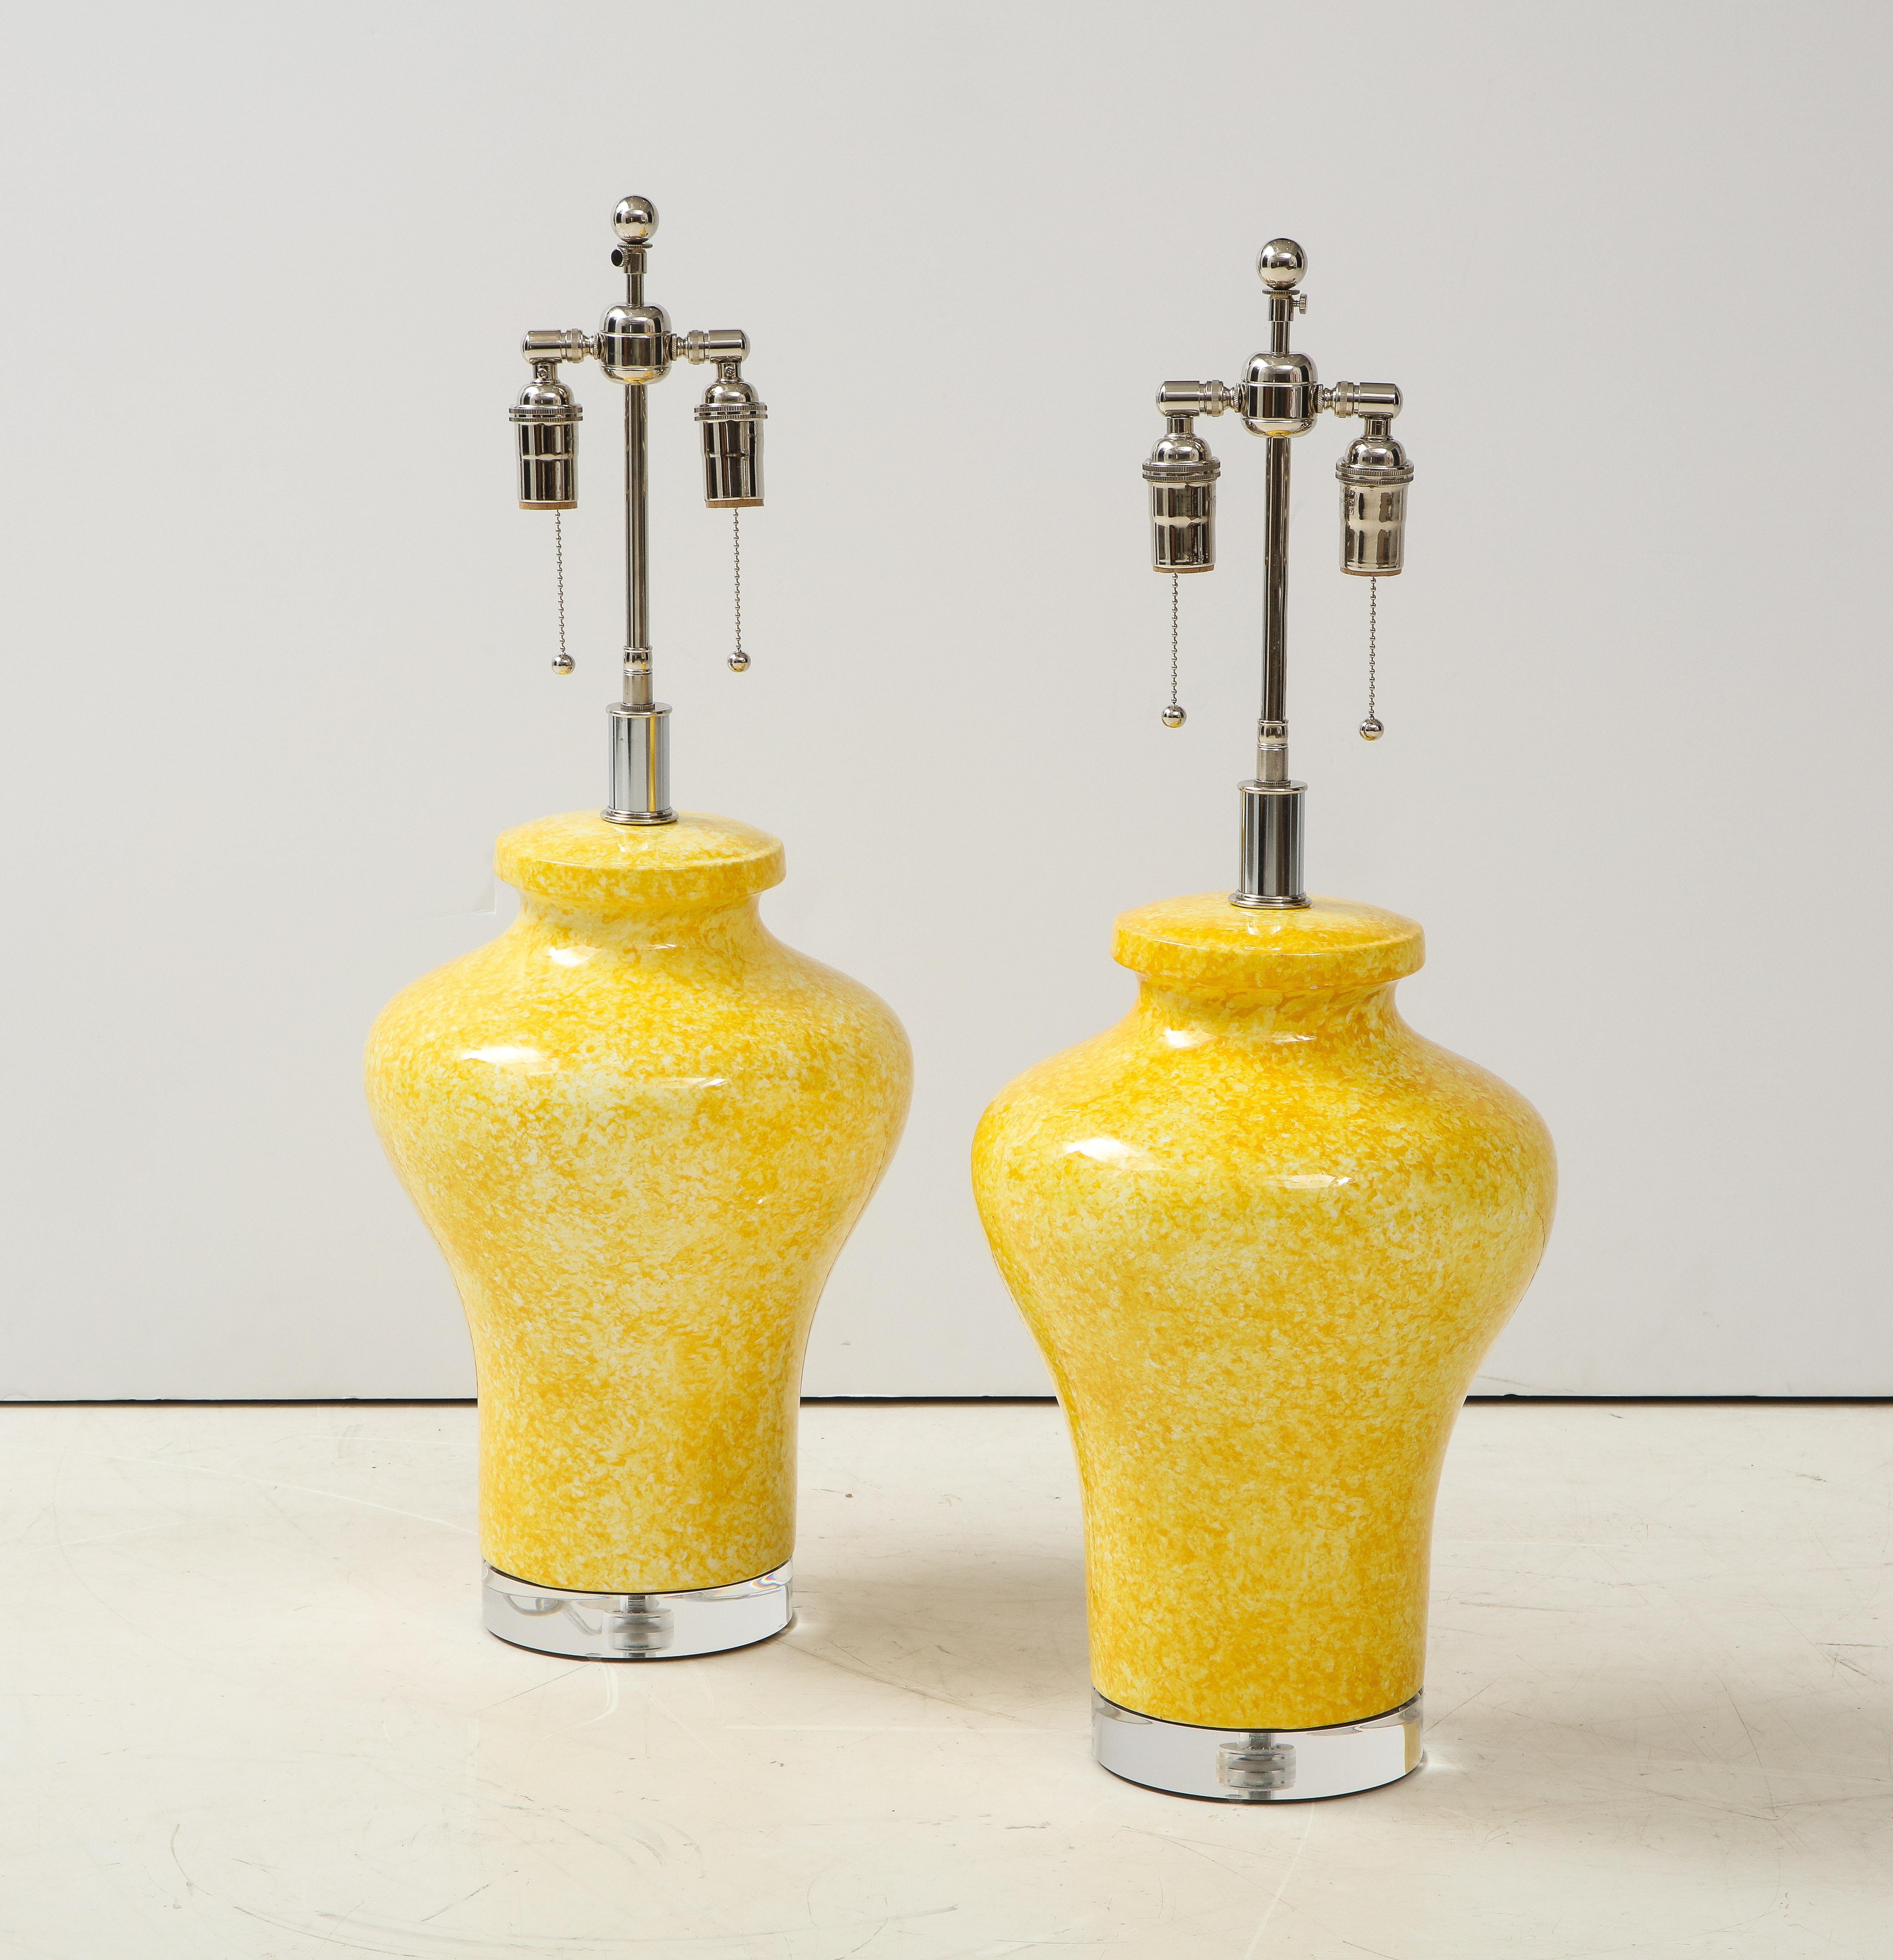 Pair of large ceramic lamps in a canary yellow glazed finish.
The lamps are mounted on 1.25